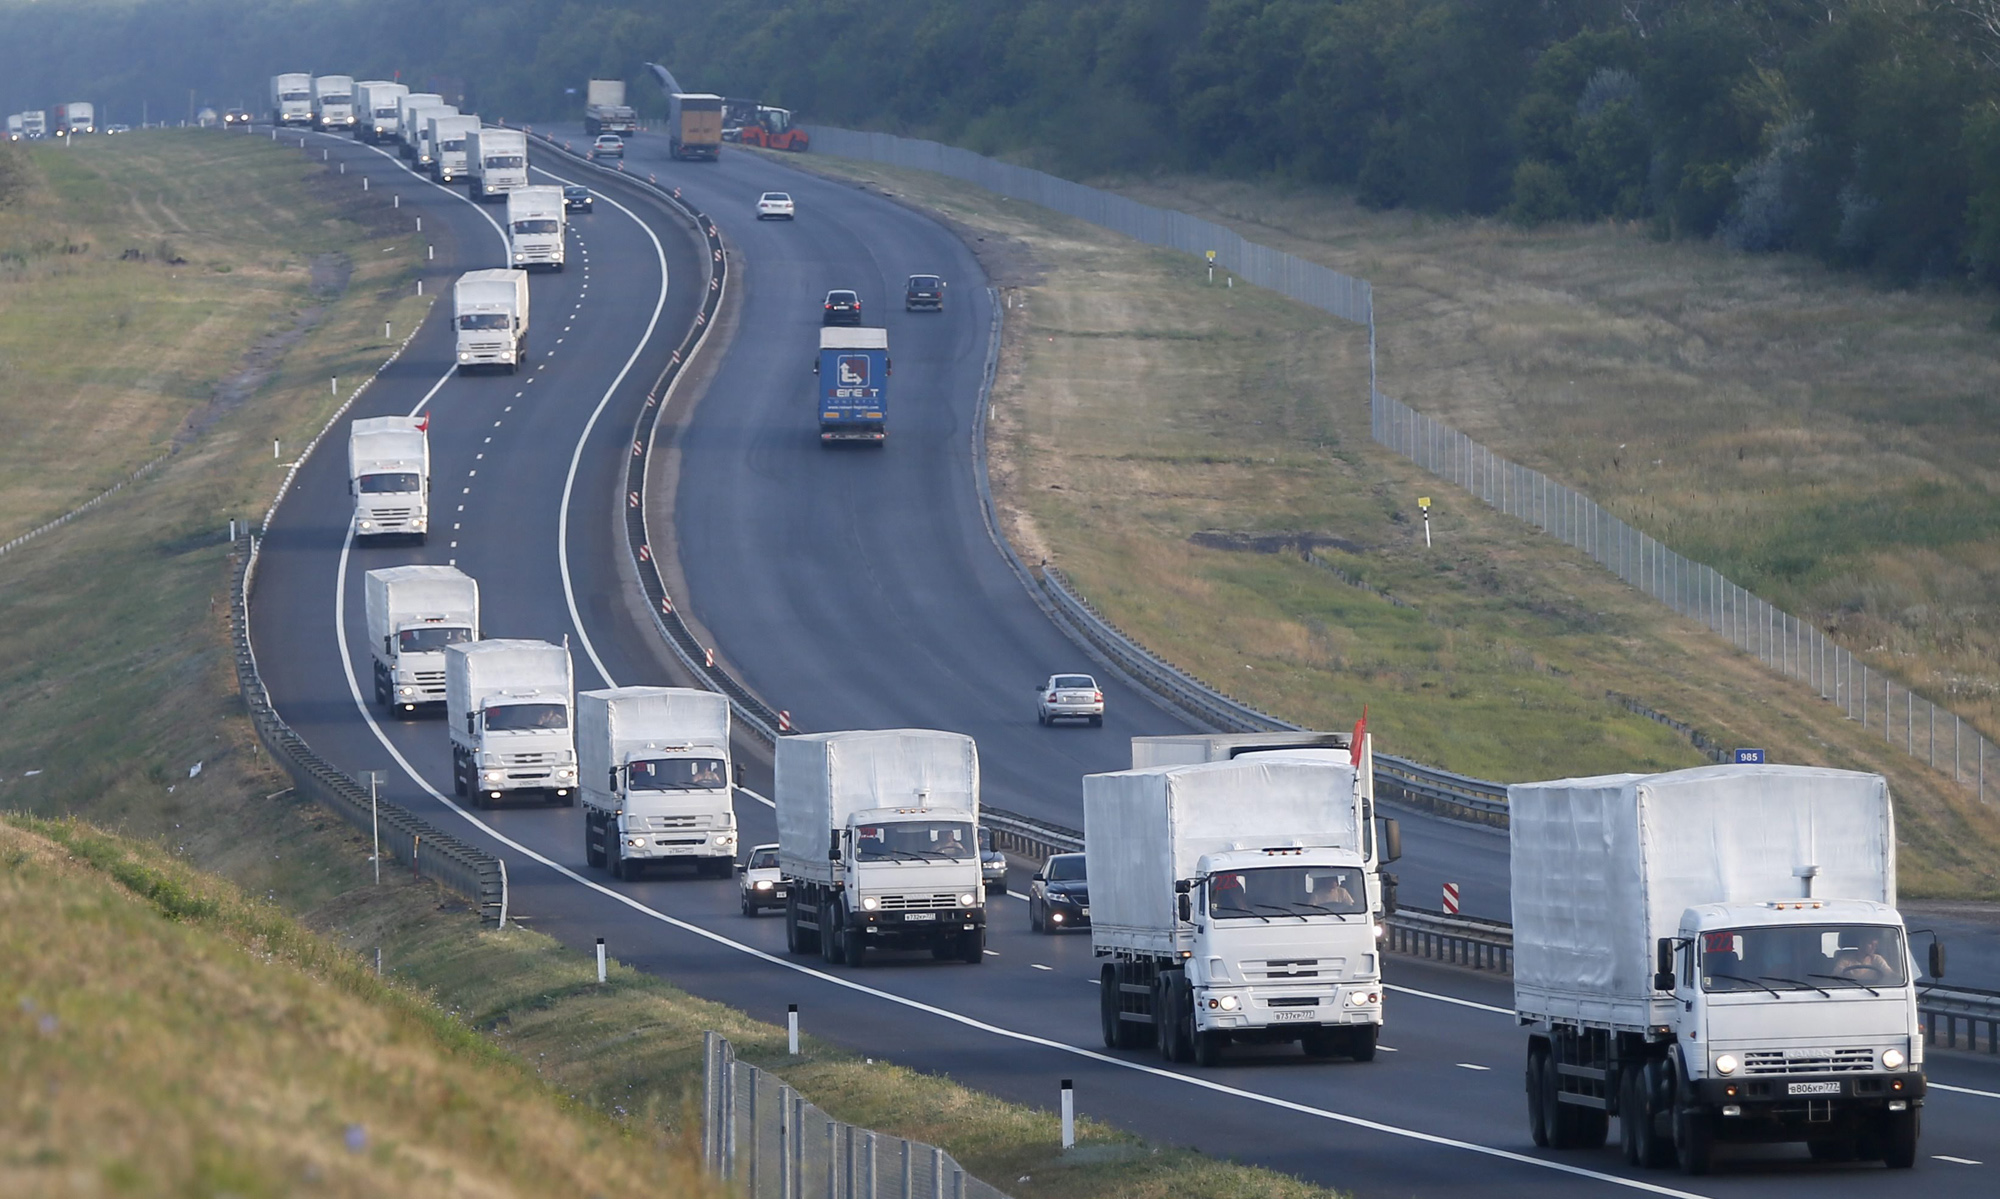 A Russian convoy carrying humanitarian aid for residents in rebel eastern Ukrainian regions moves along a road about 30 miles from Voronezh, Russia, Aug. 14, 2014.